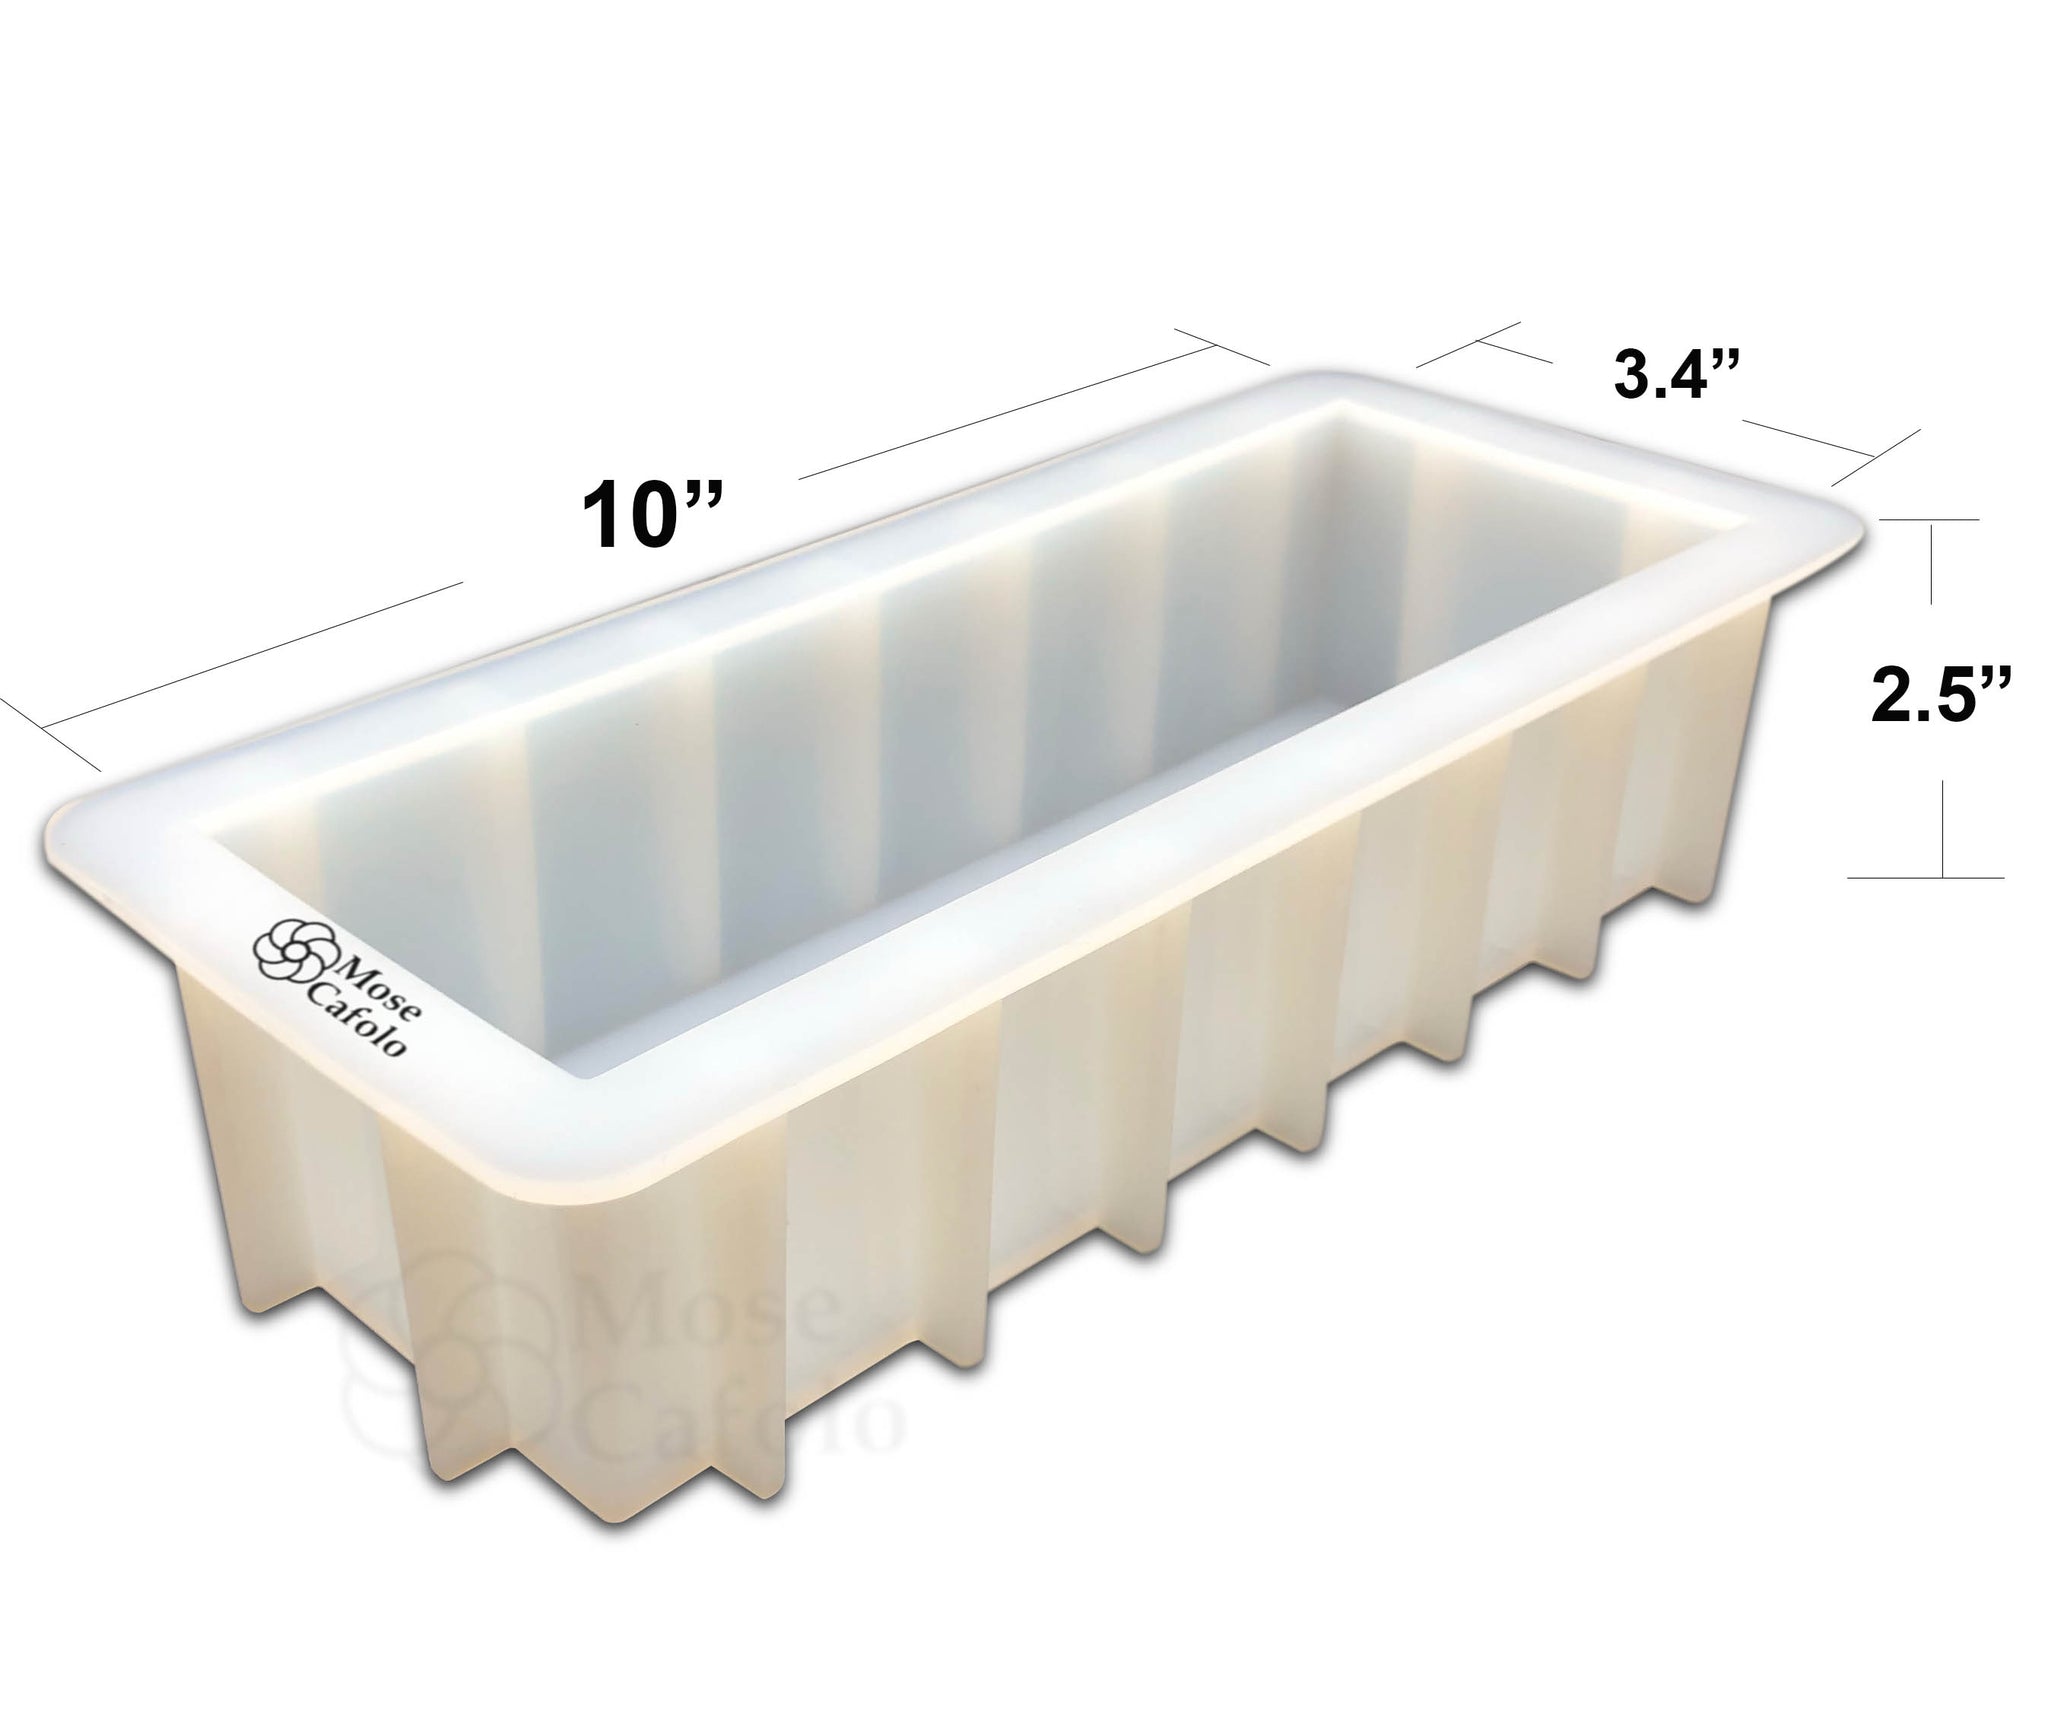 Loaf Soap Silicone Mold 10'' Rectangle White Mould DIY Handmade